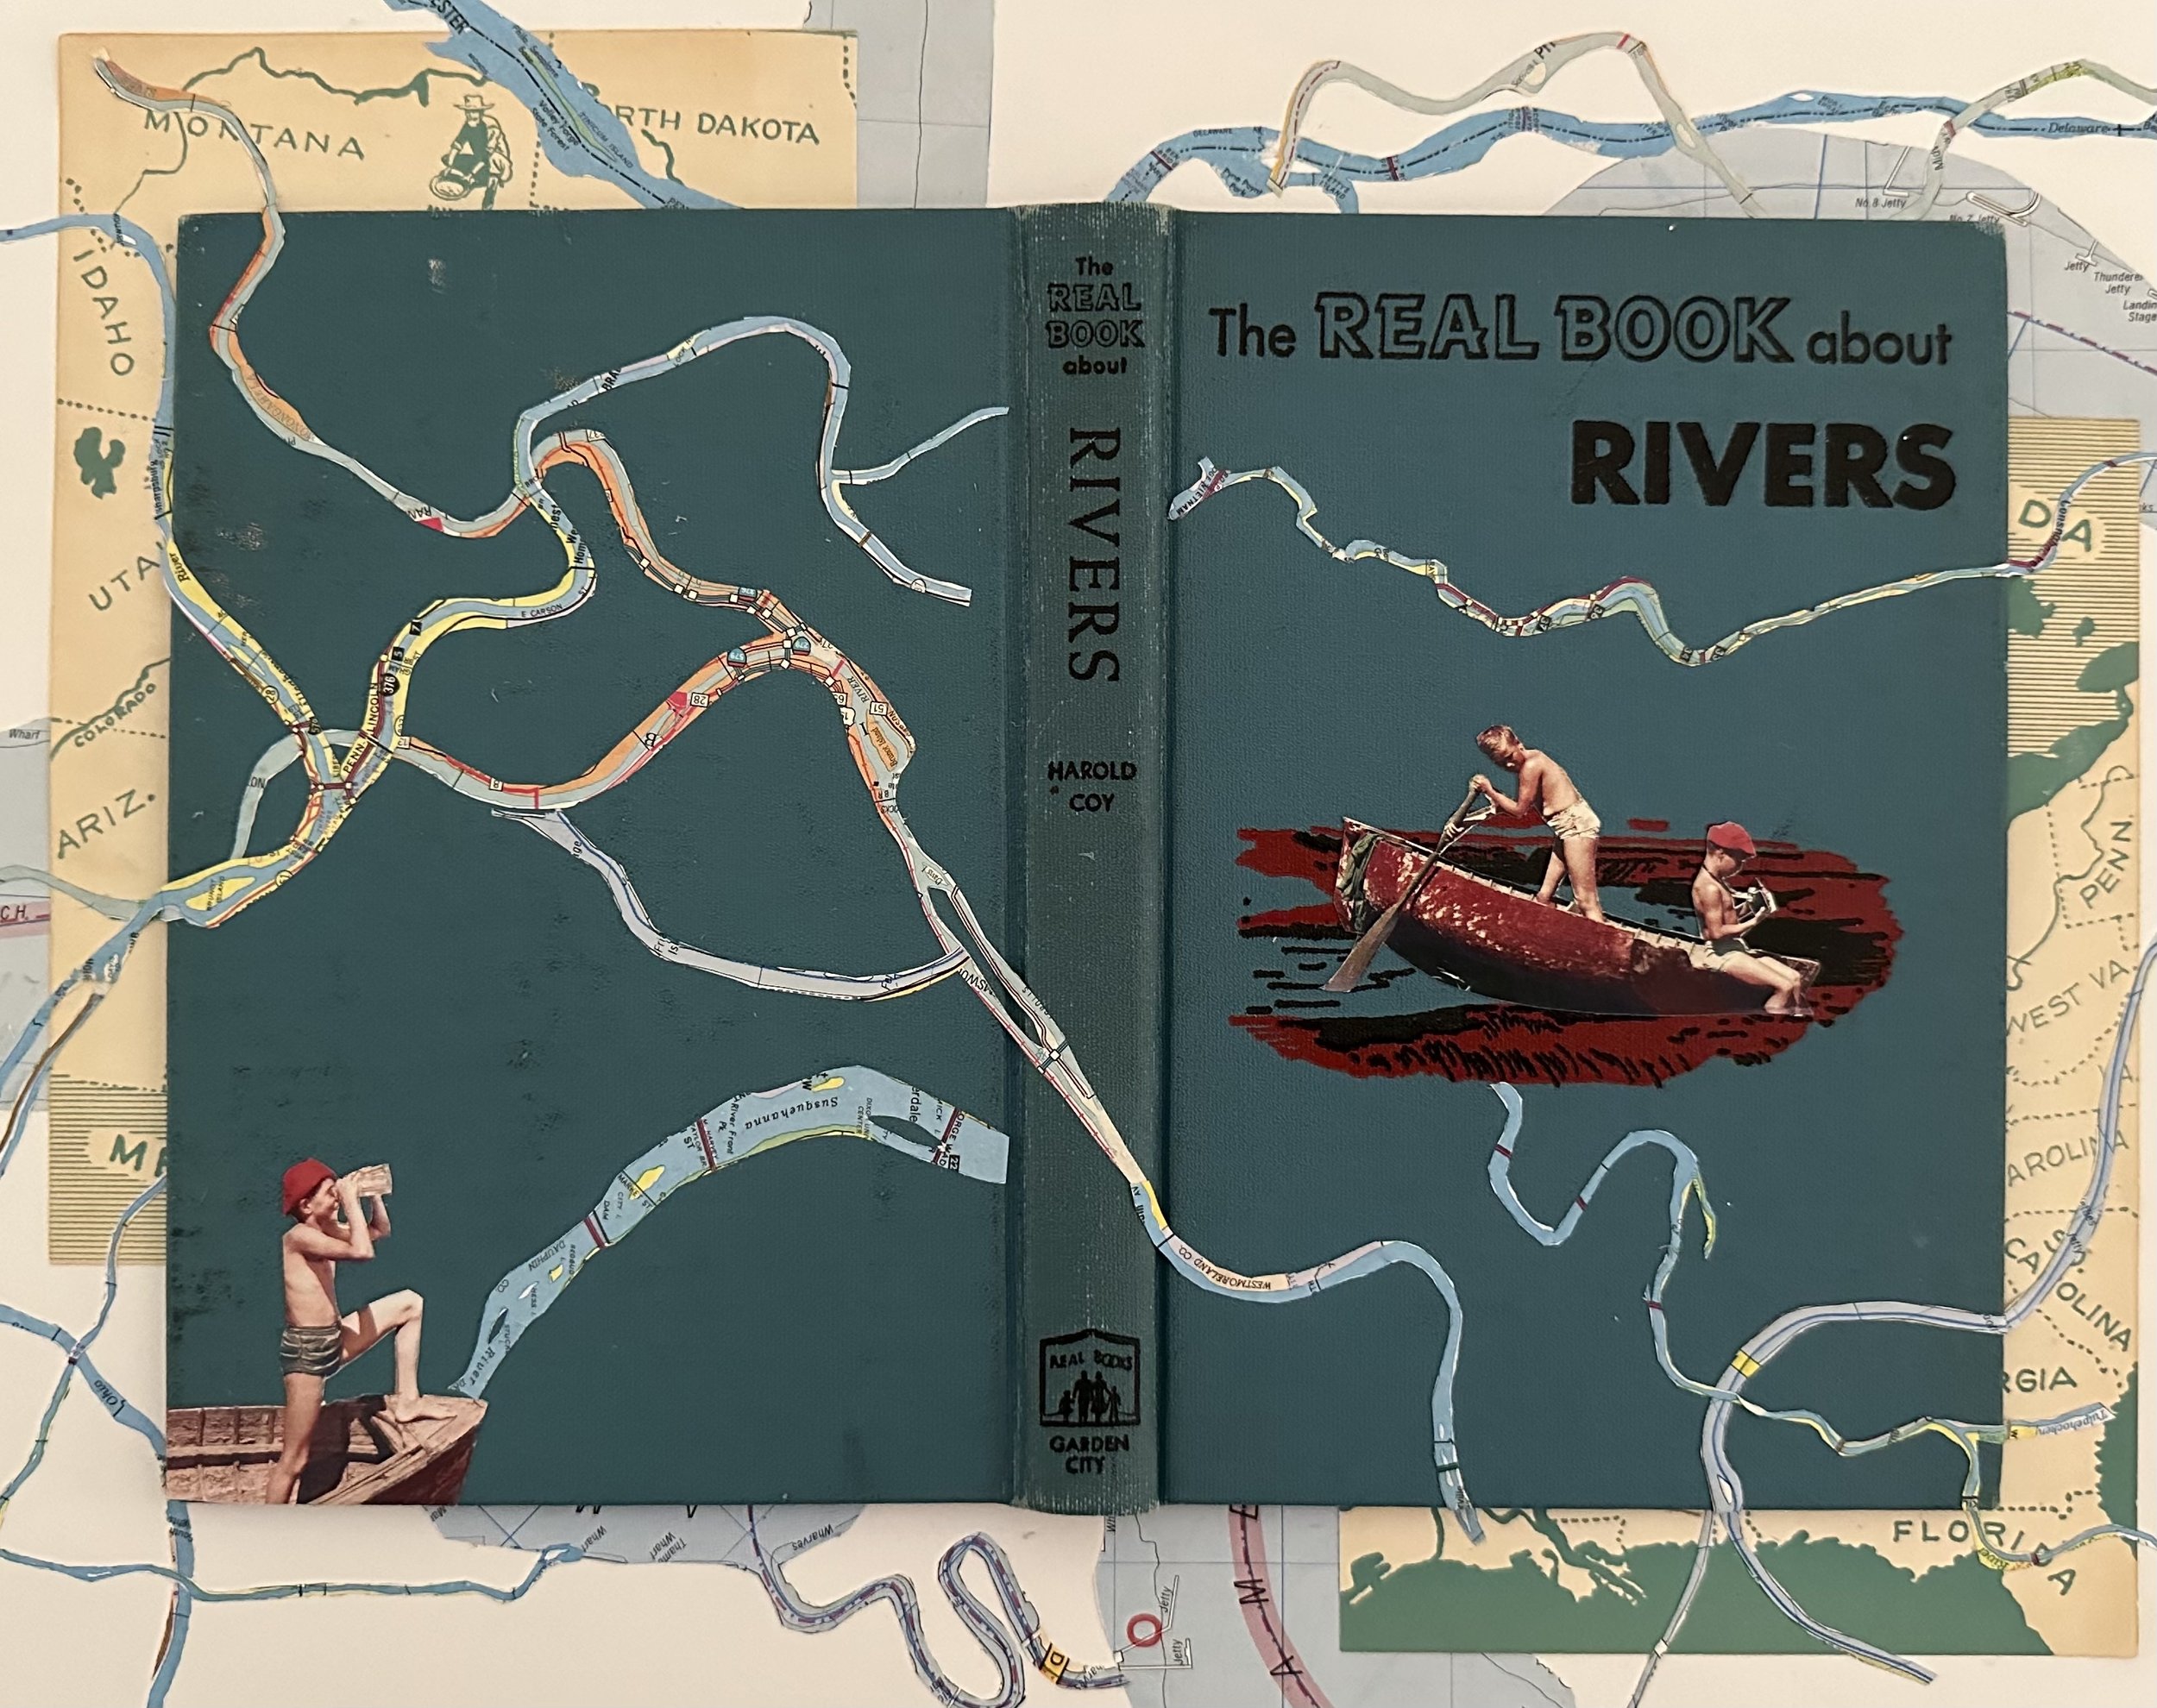 The Real Book About Rivers (1953)